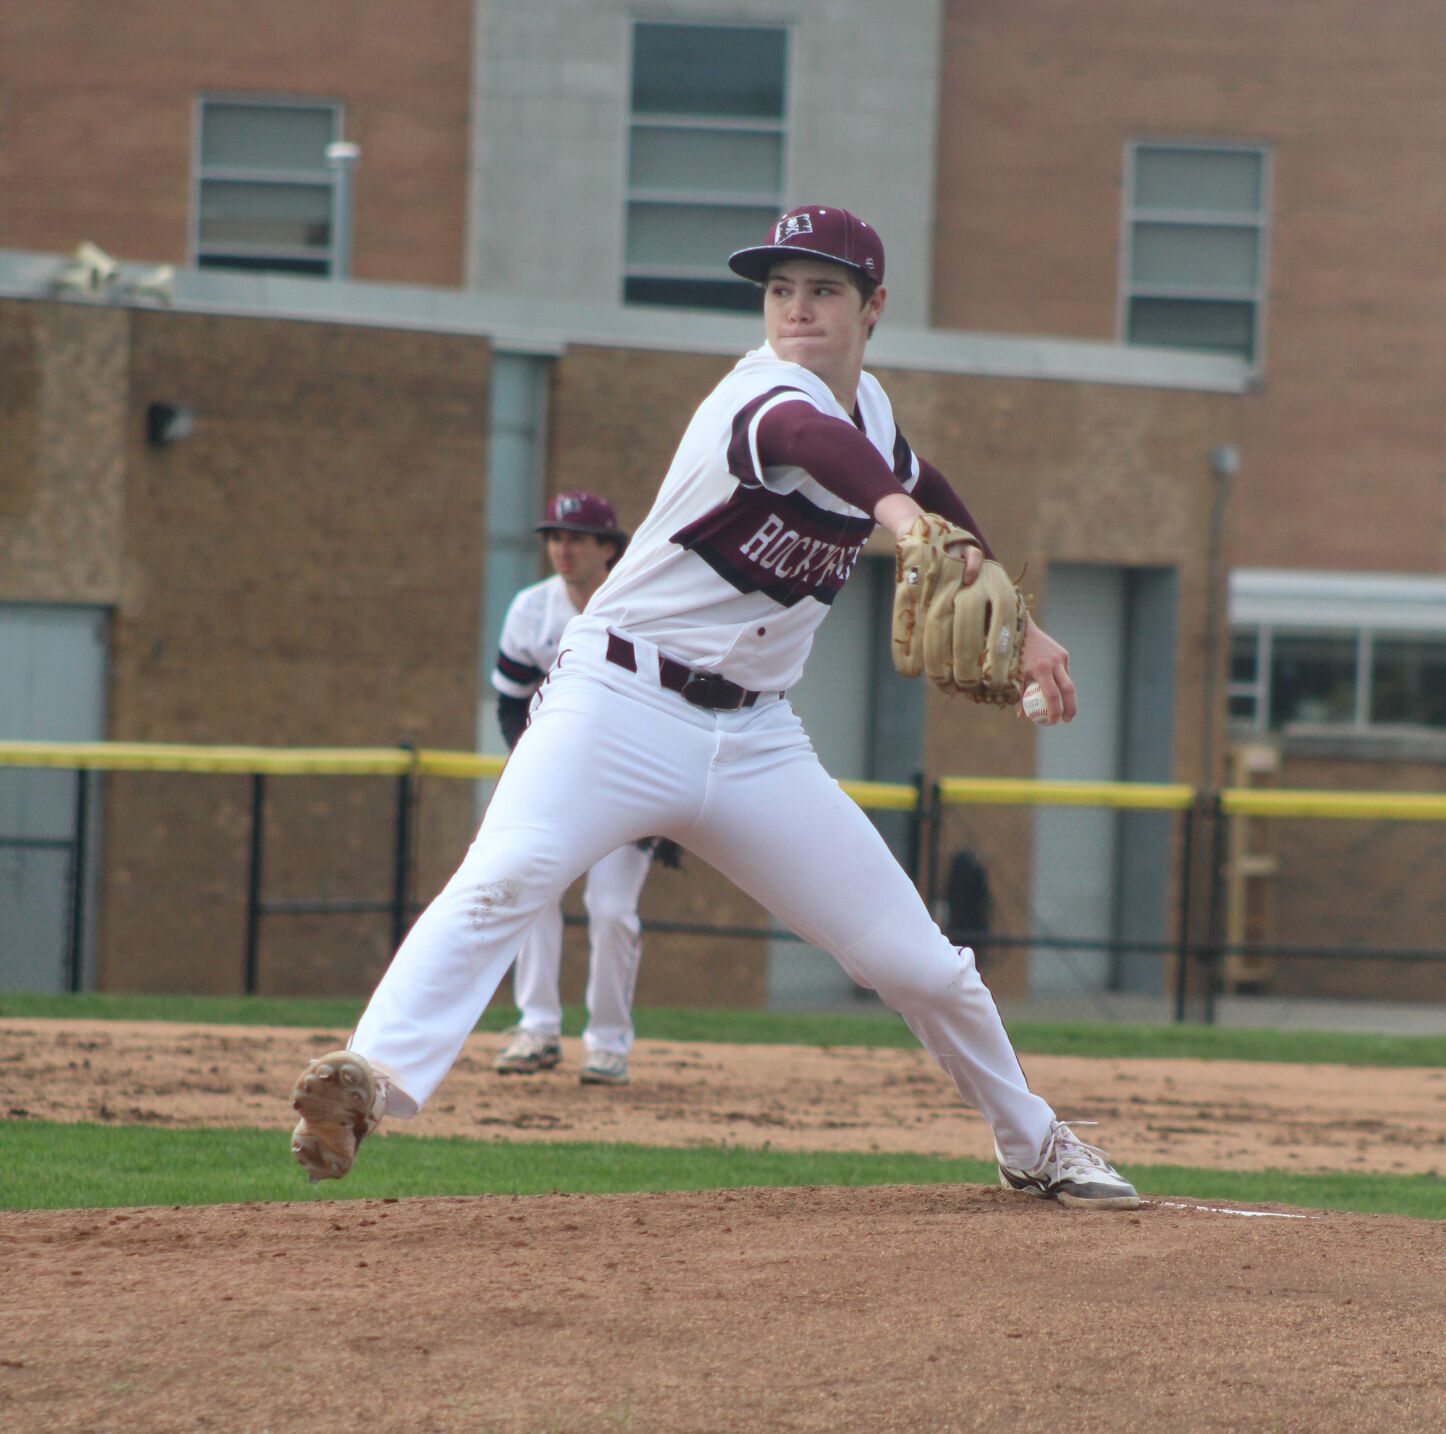 Rocky River’s Heigle Throws No-Hitter Against North Olmsted in High School Baseball Victory